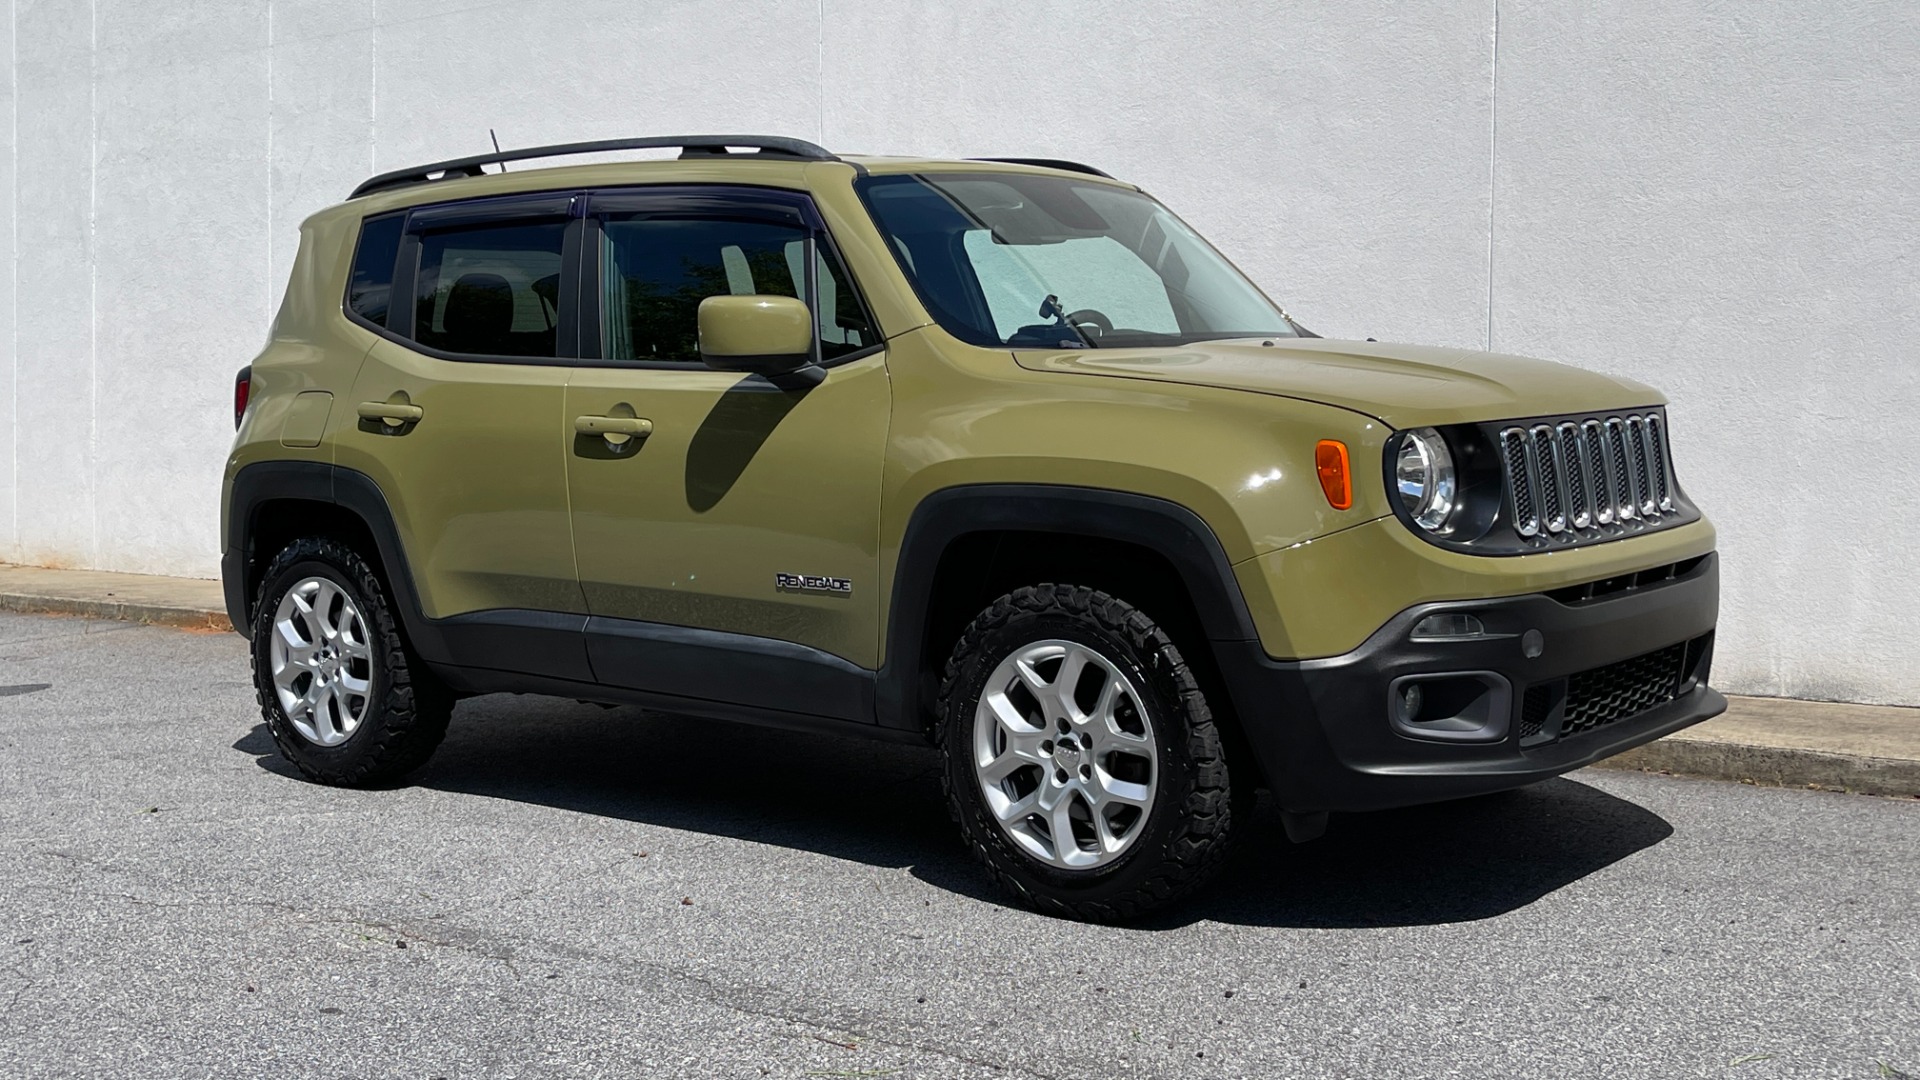 Used 2015 Jeep Renegade LATITUDE / 2.4L ENGINE / KEYLESS ENTRY / REMOTE START for sale $17,495 at Formula Imports in Charlotte NC 28227 5